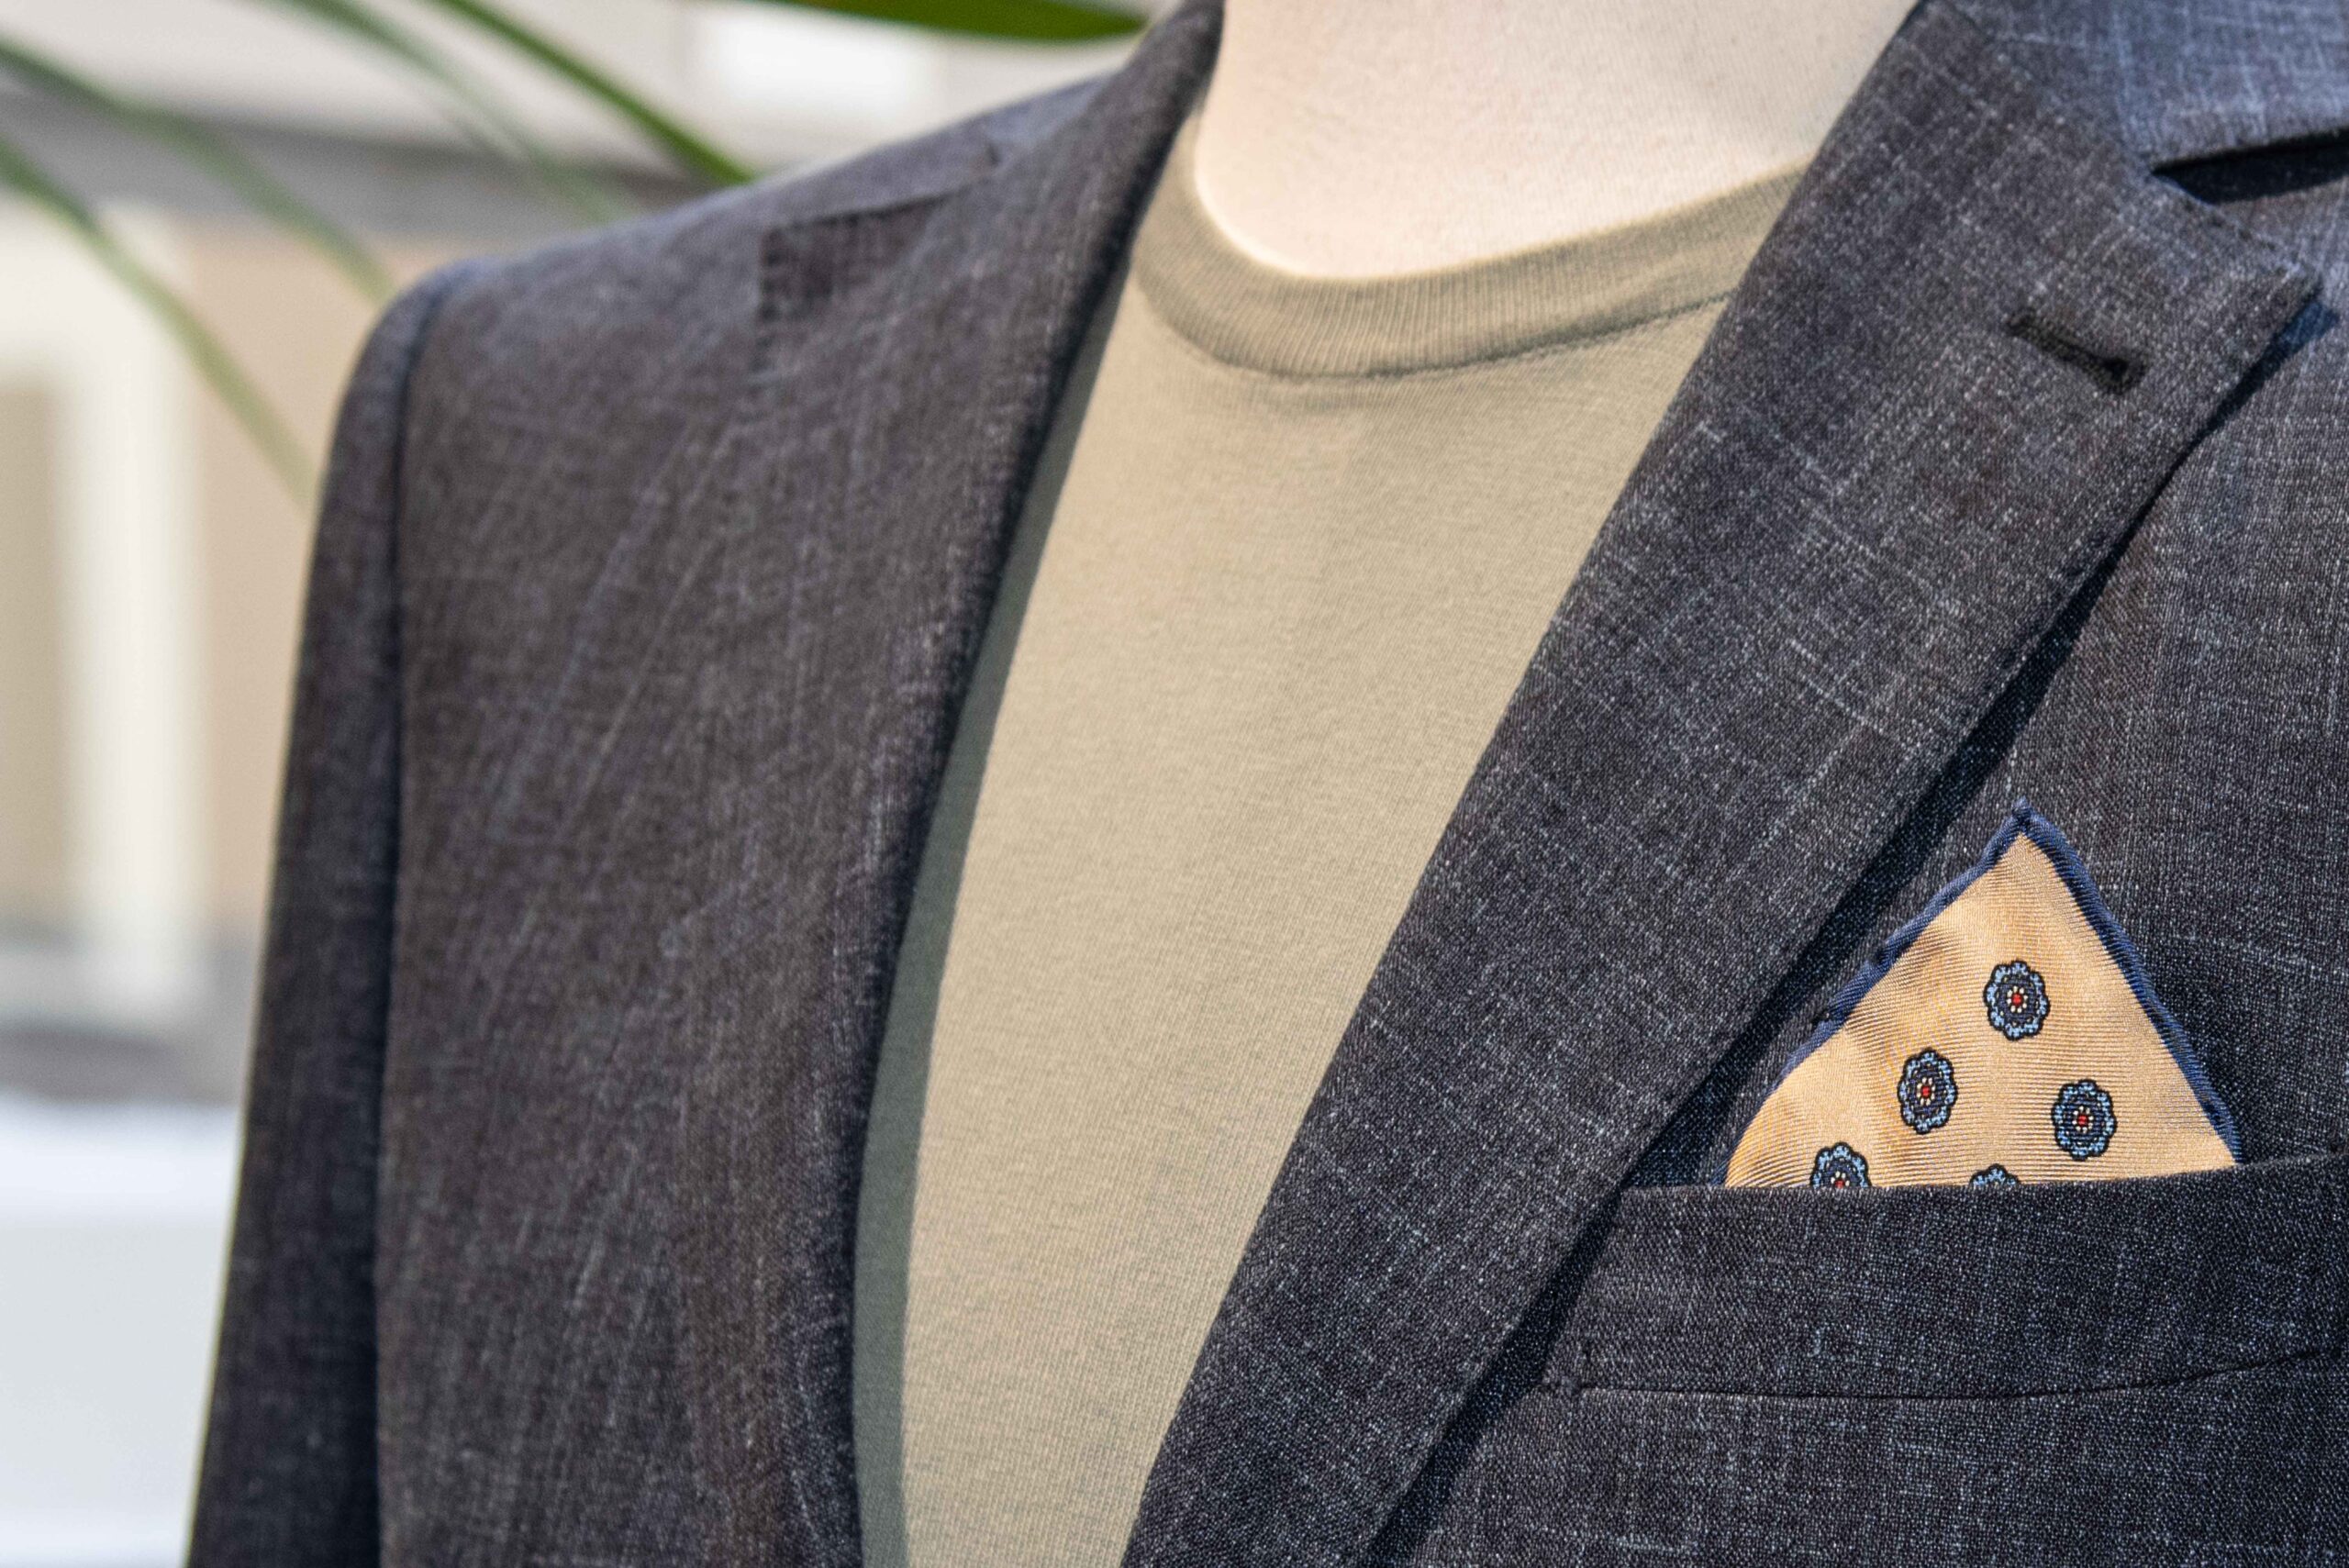 Men's pocket squares: how to choose and match the pocket handkerchief